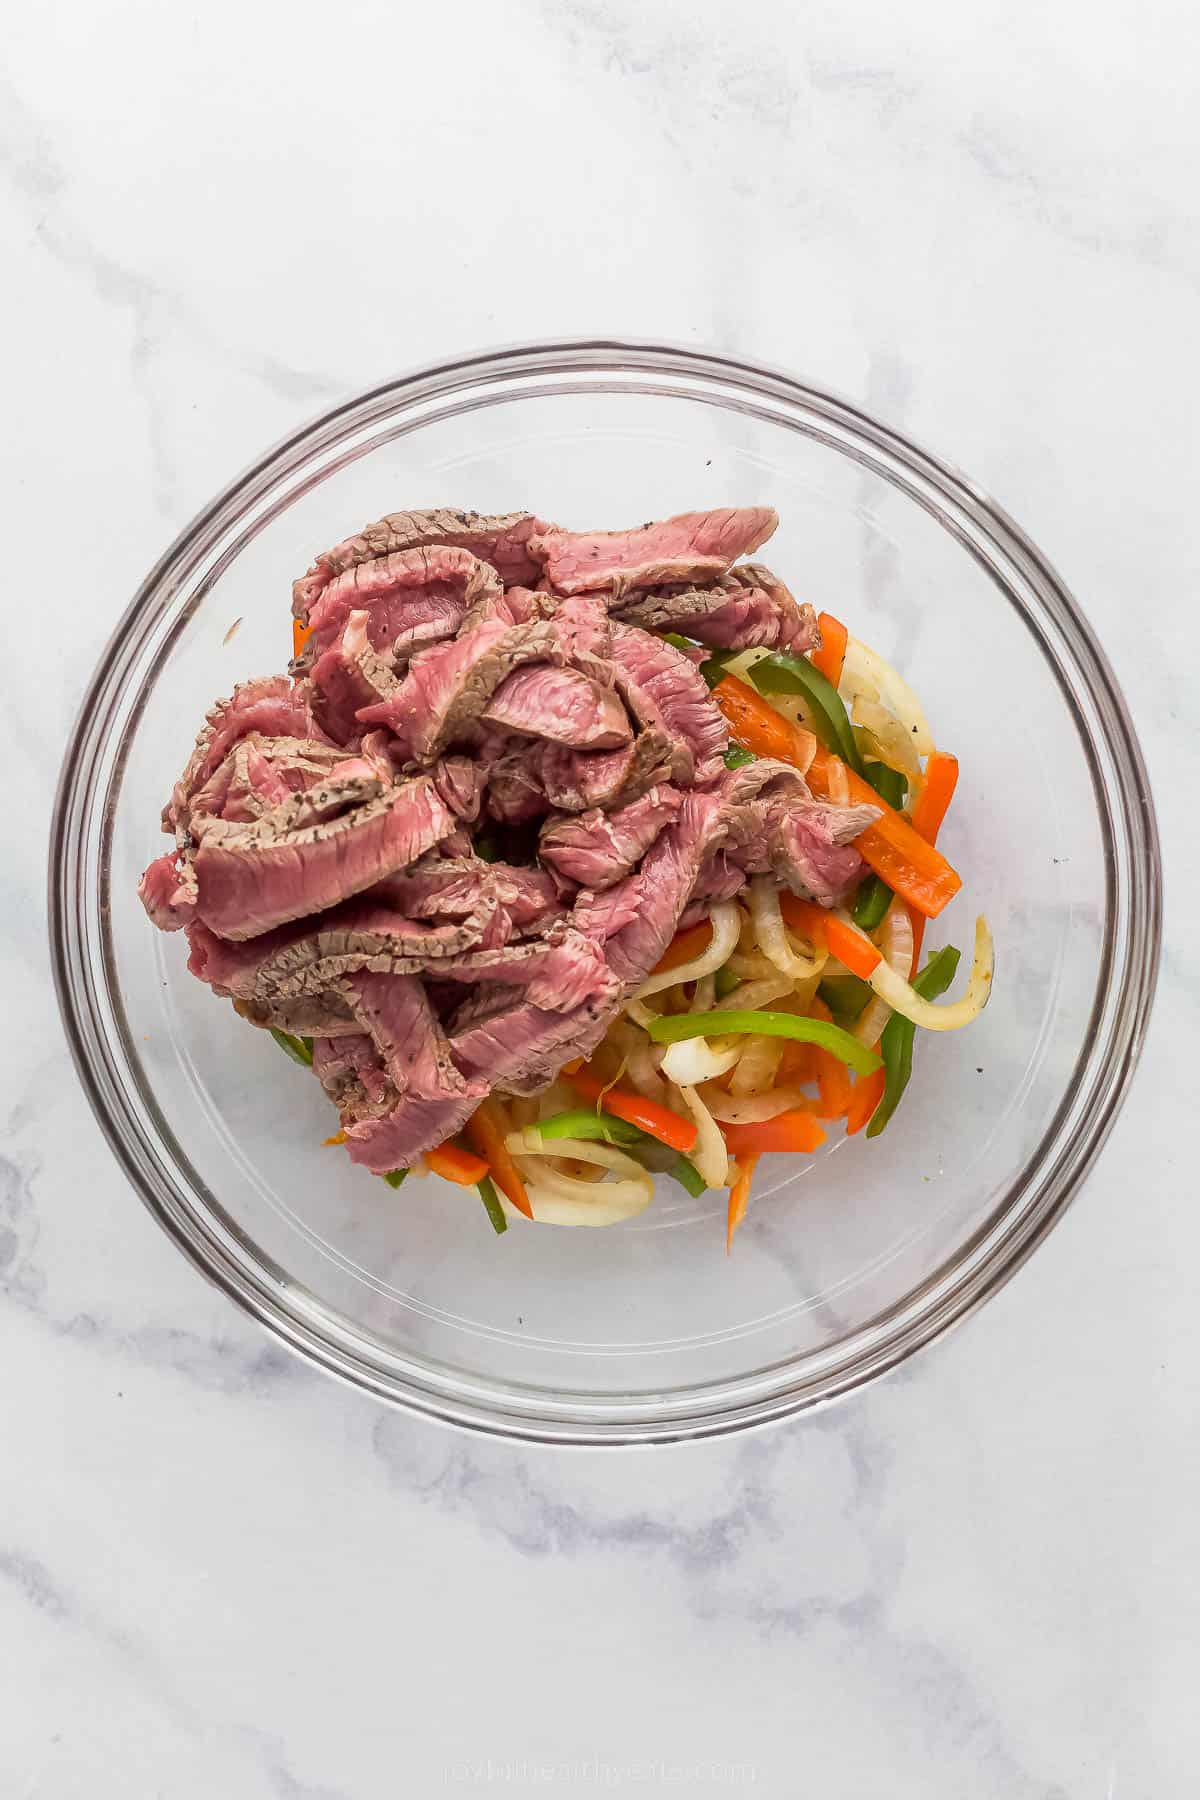 sliced steak and vegetables in a glass bowl